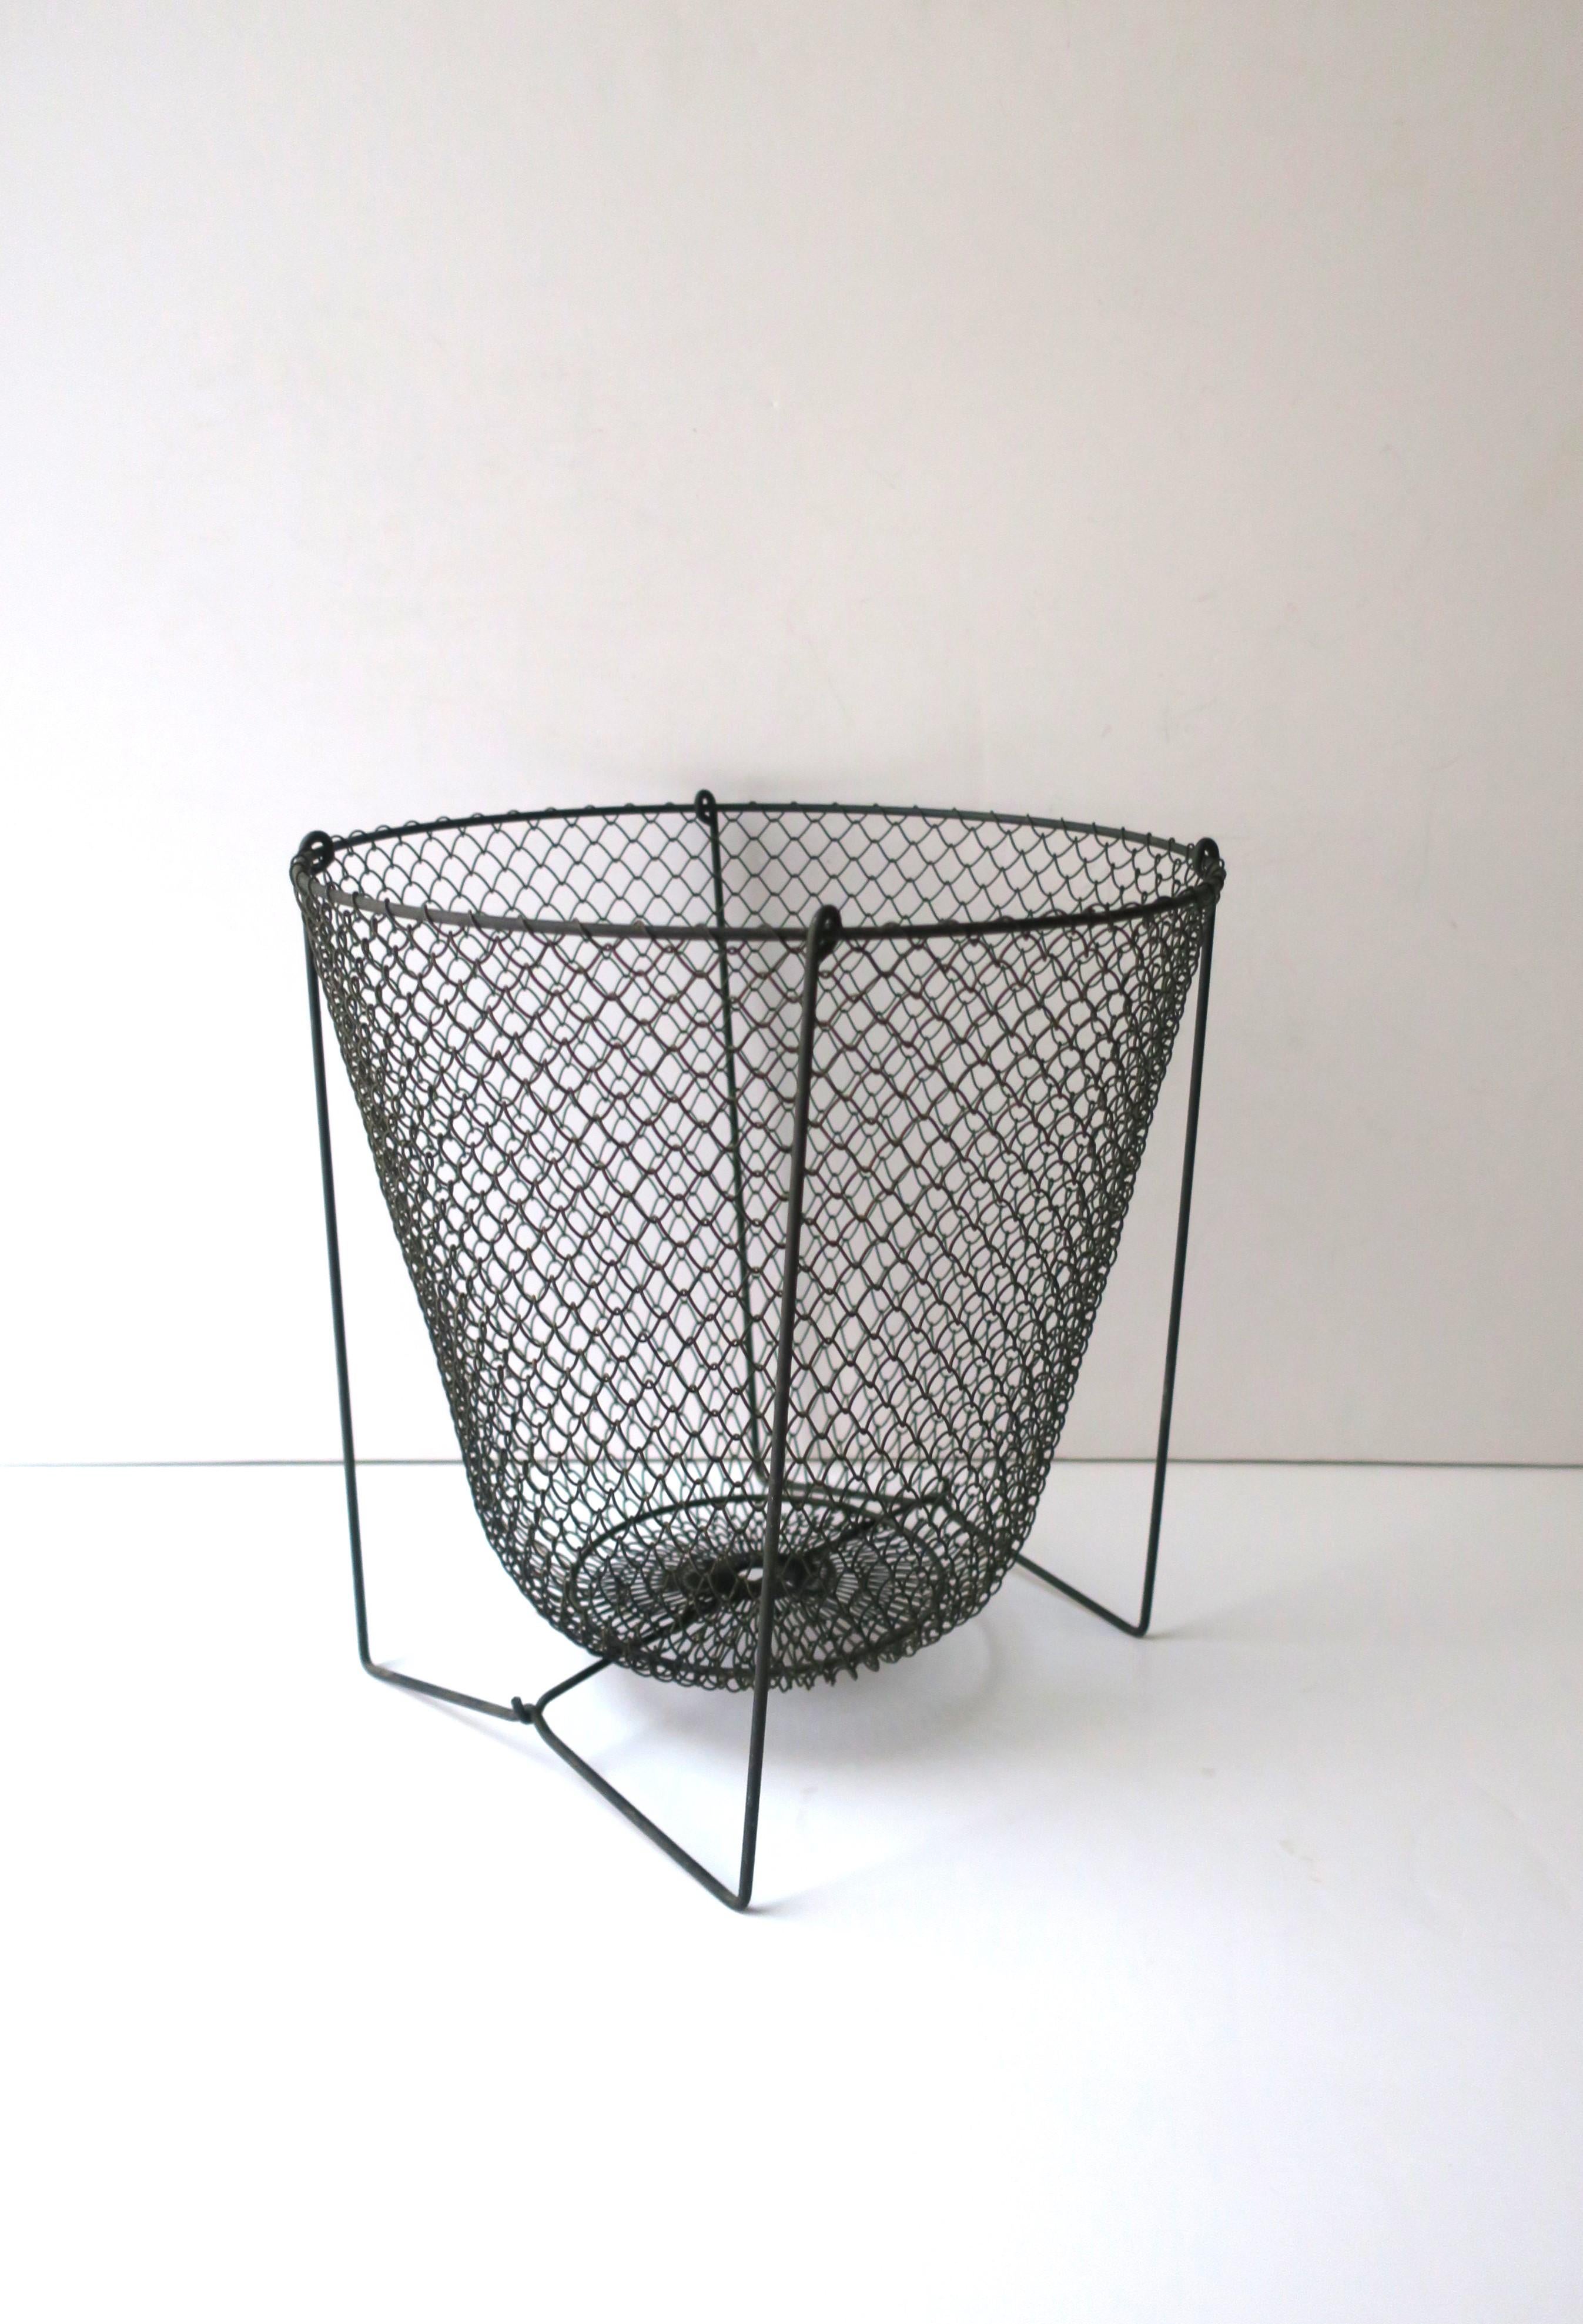 20th Century Black Metal Mesh Wire Wastebasket Trash Can For Sale